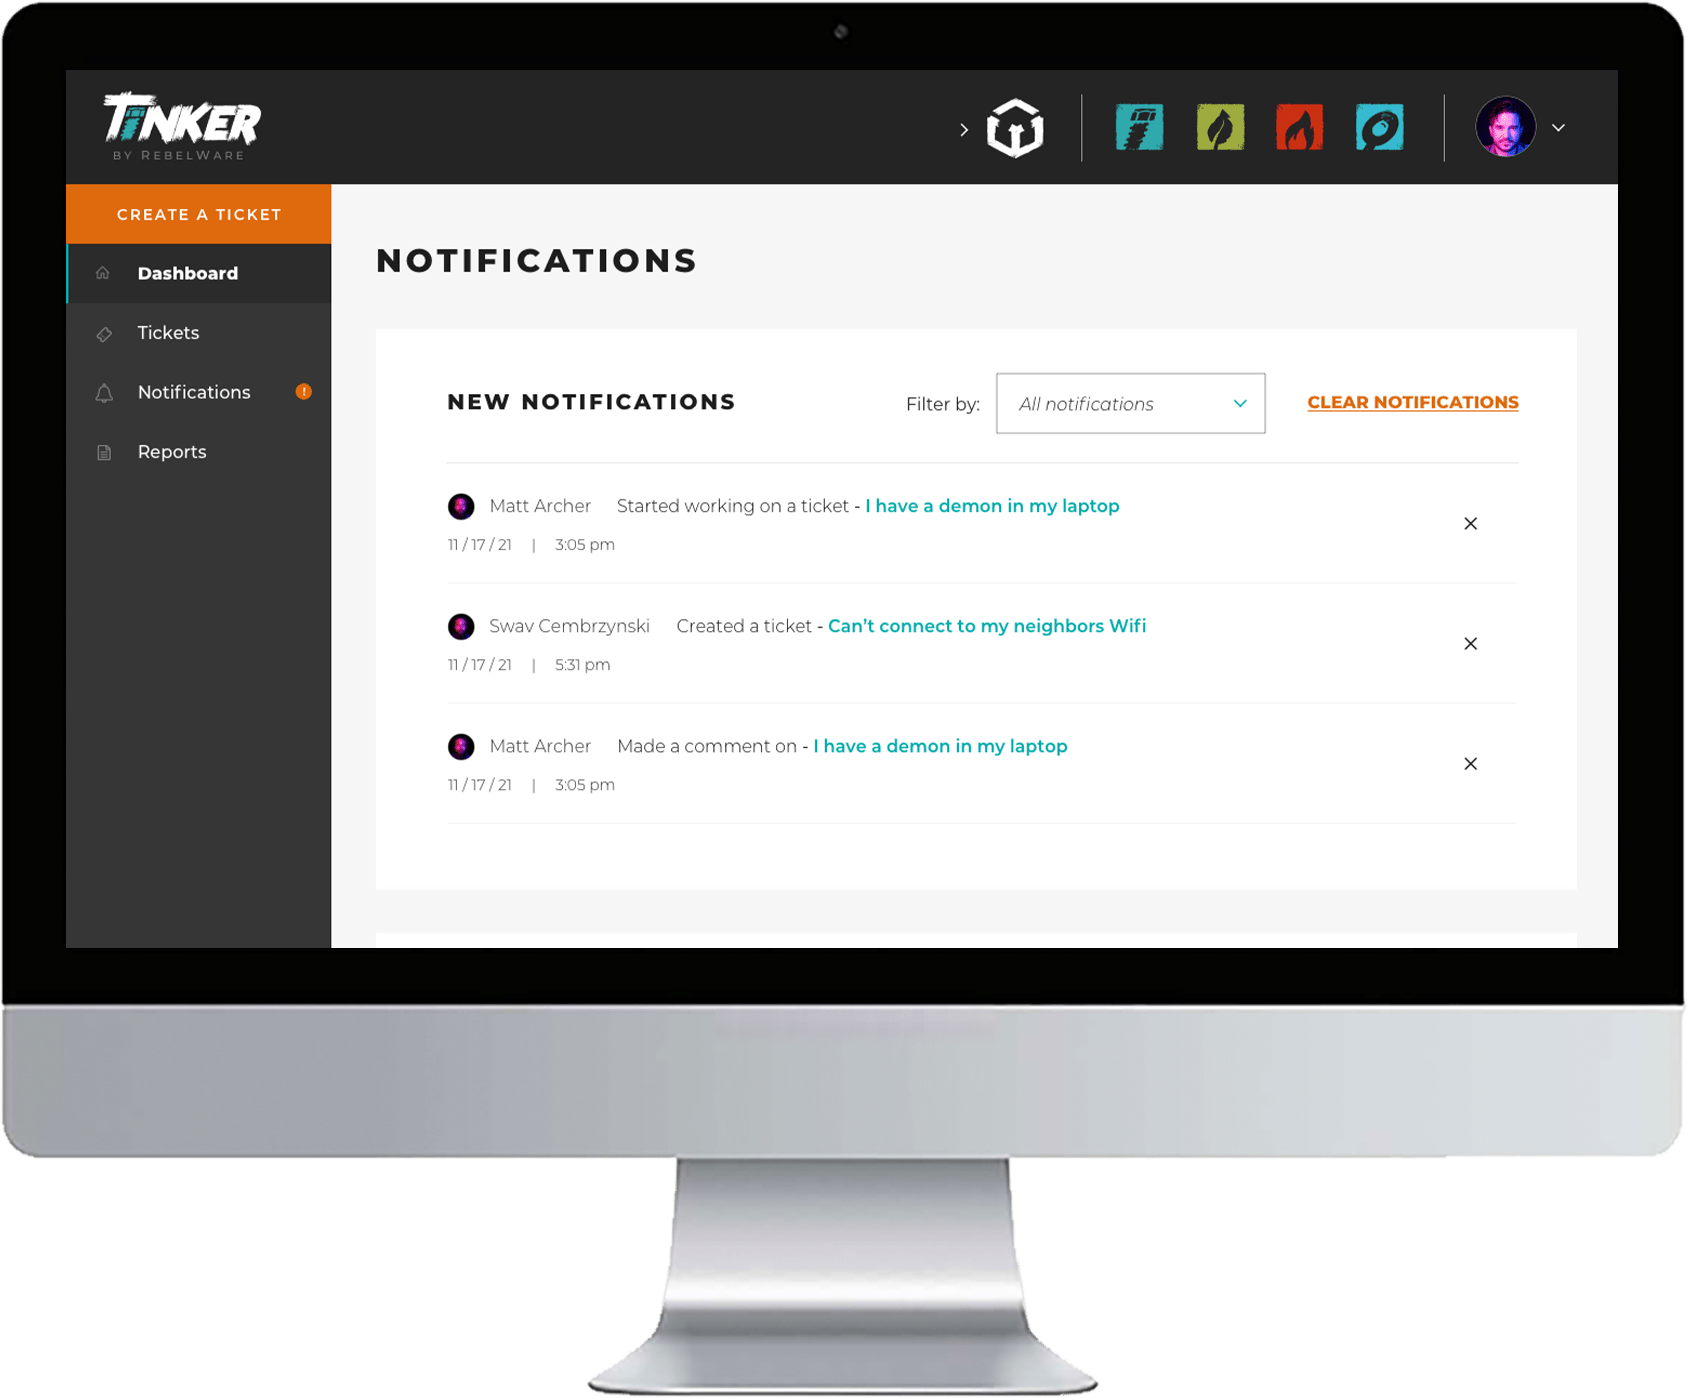 New notifications view in Tinker